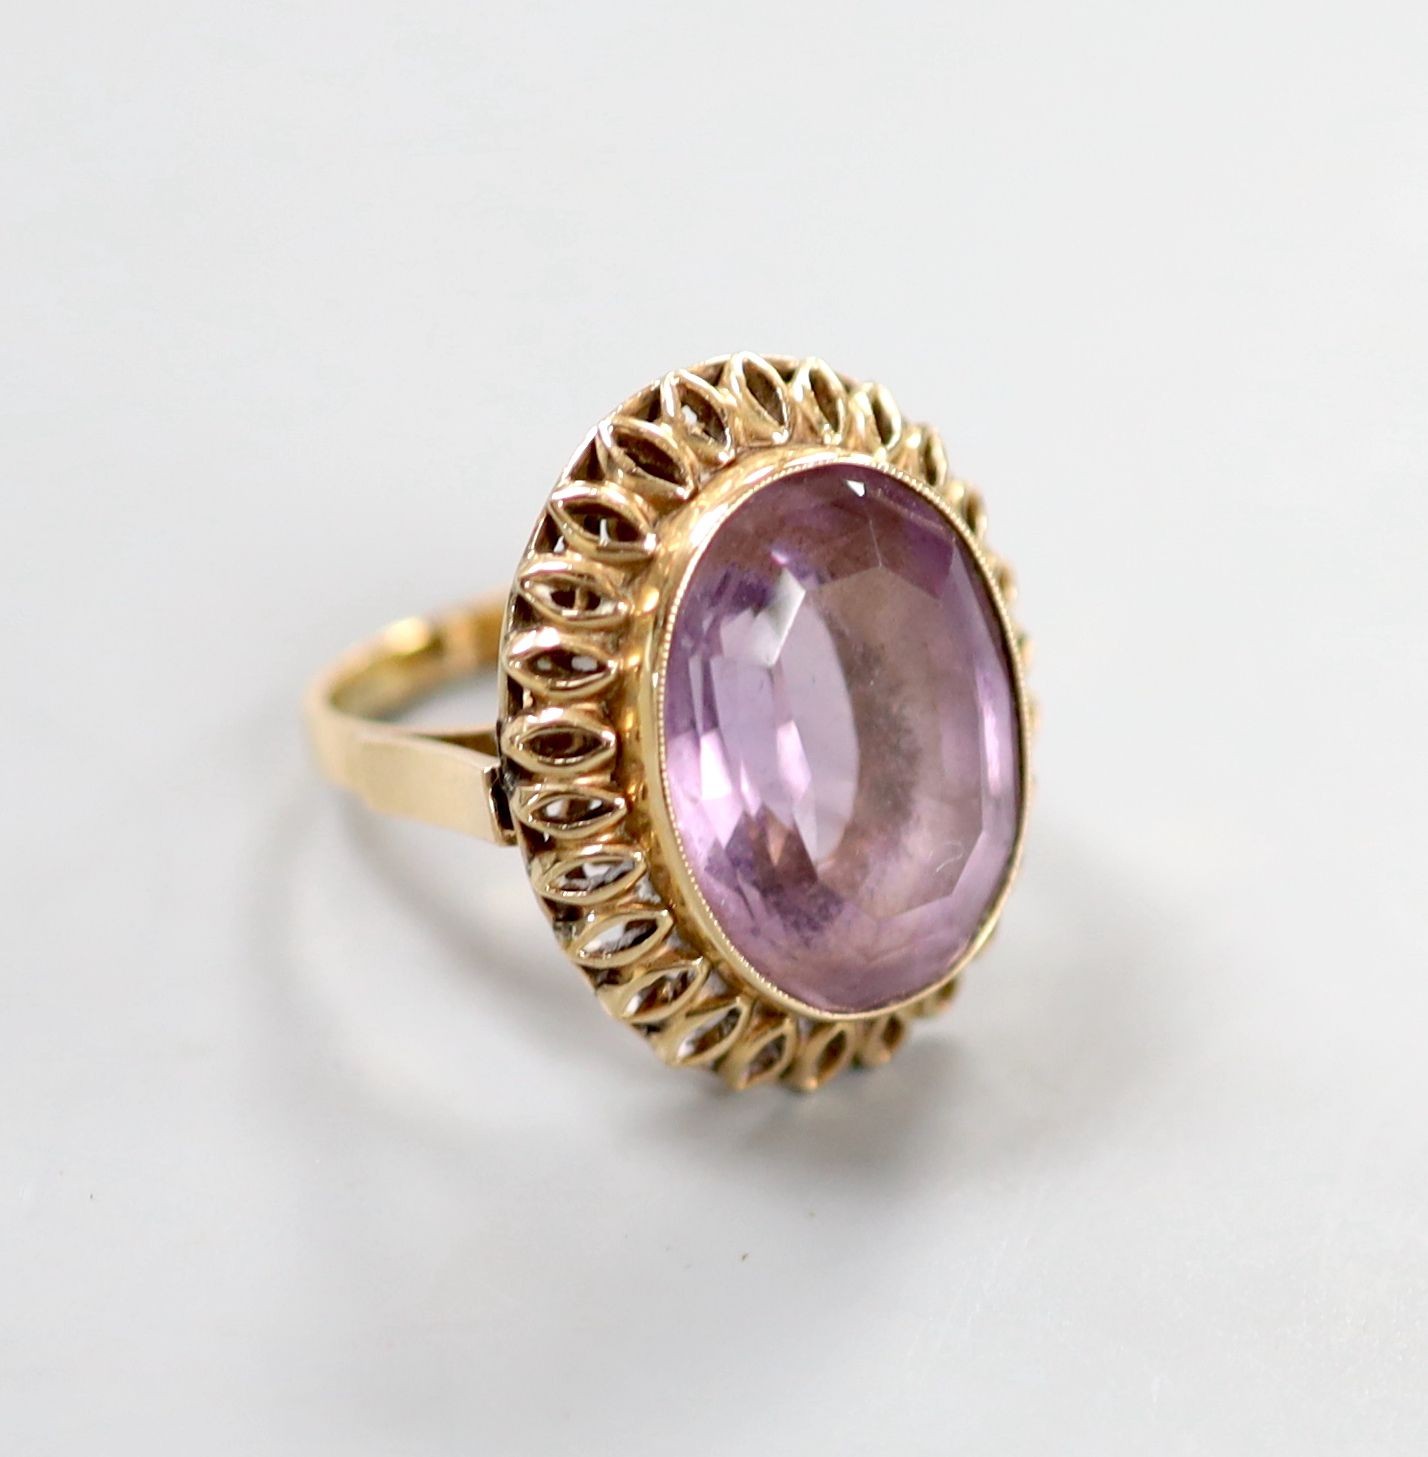 A continental 14k yellow metal and oval cut amethyst set dress ring, size M, gross weight 8.5 grams.